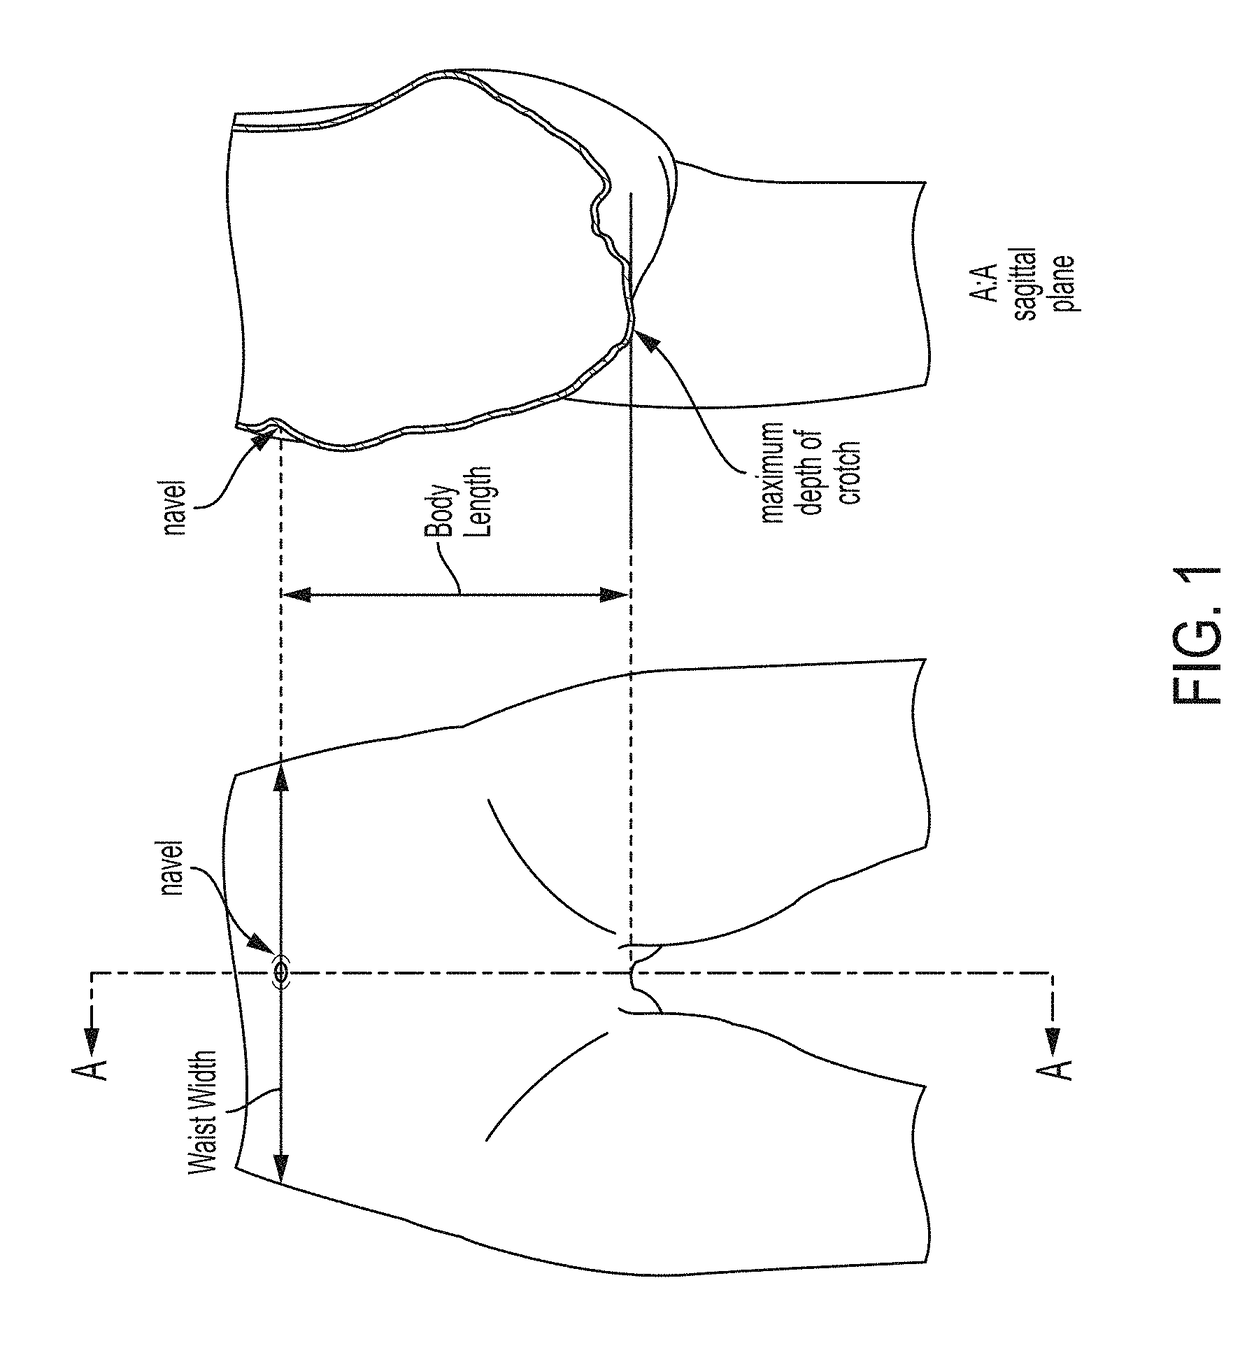 Length-to-waist silhouette(s) of absorbent article(s) comprising beamed elastics